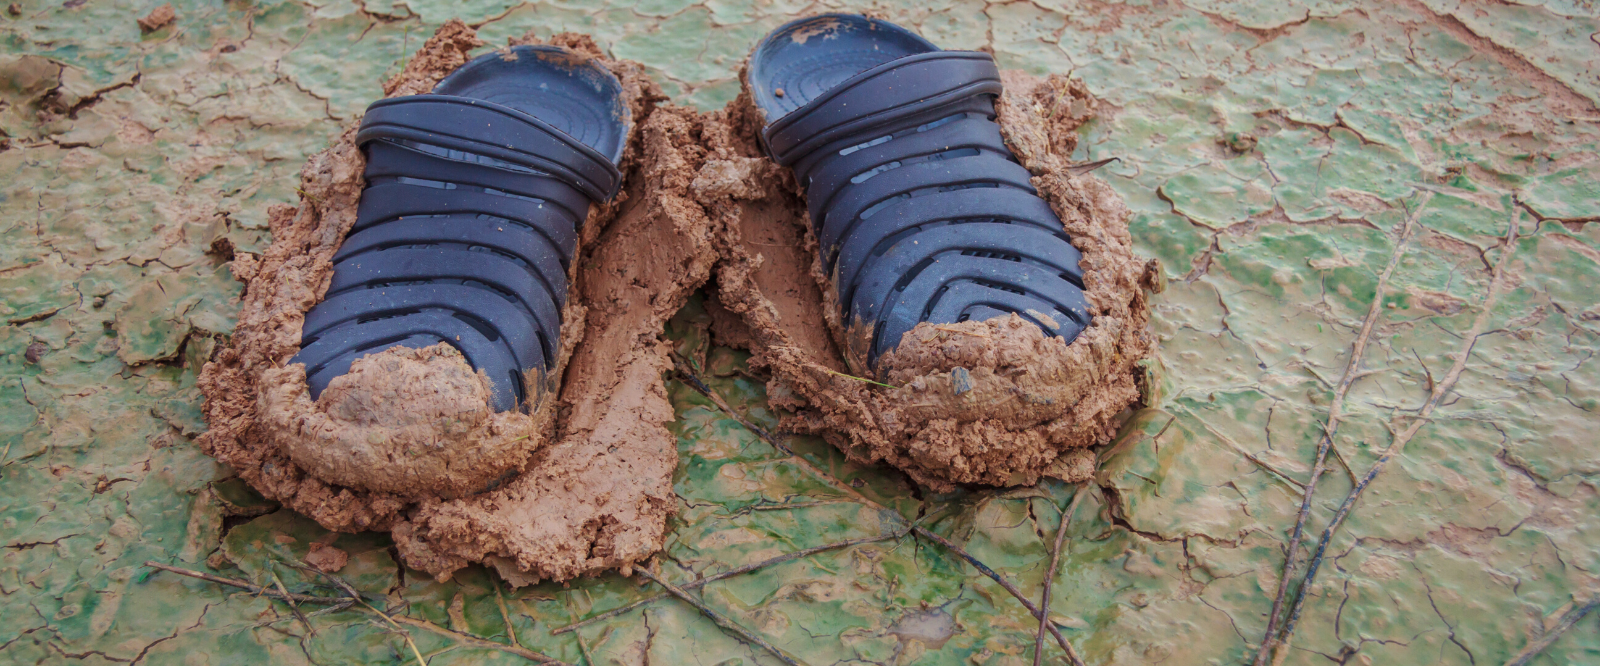 muddy shoes not holistic skincare